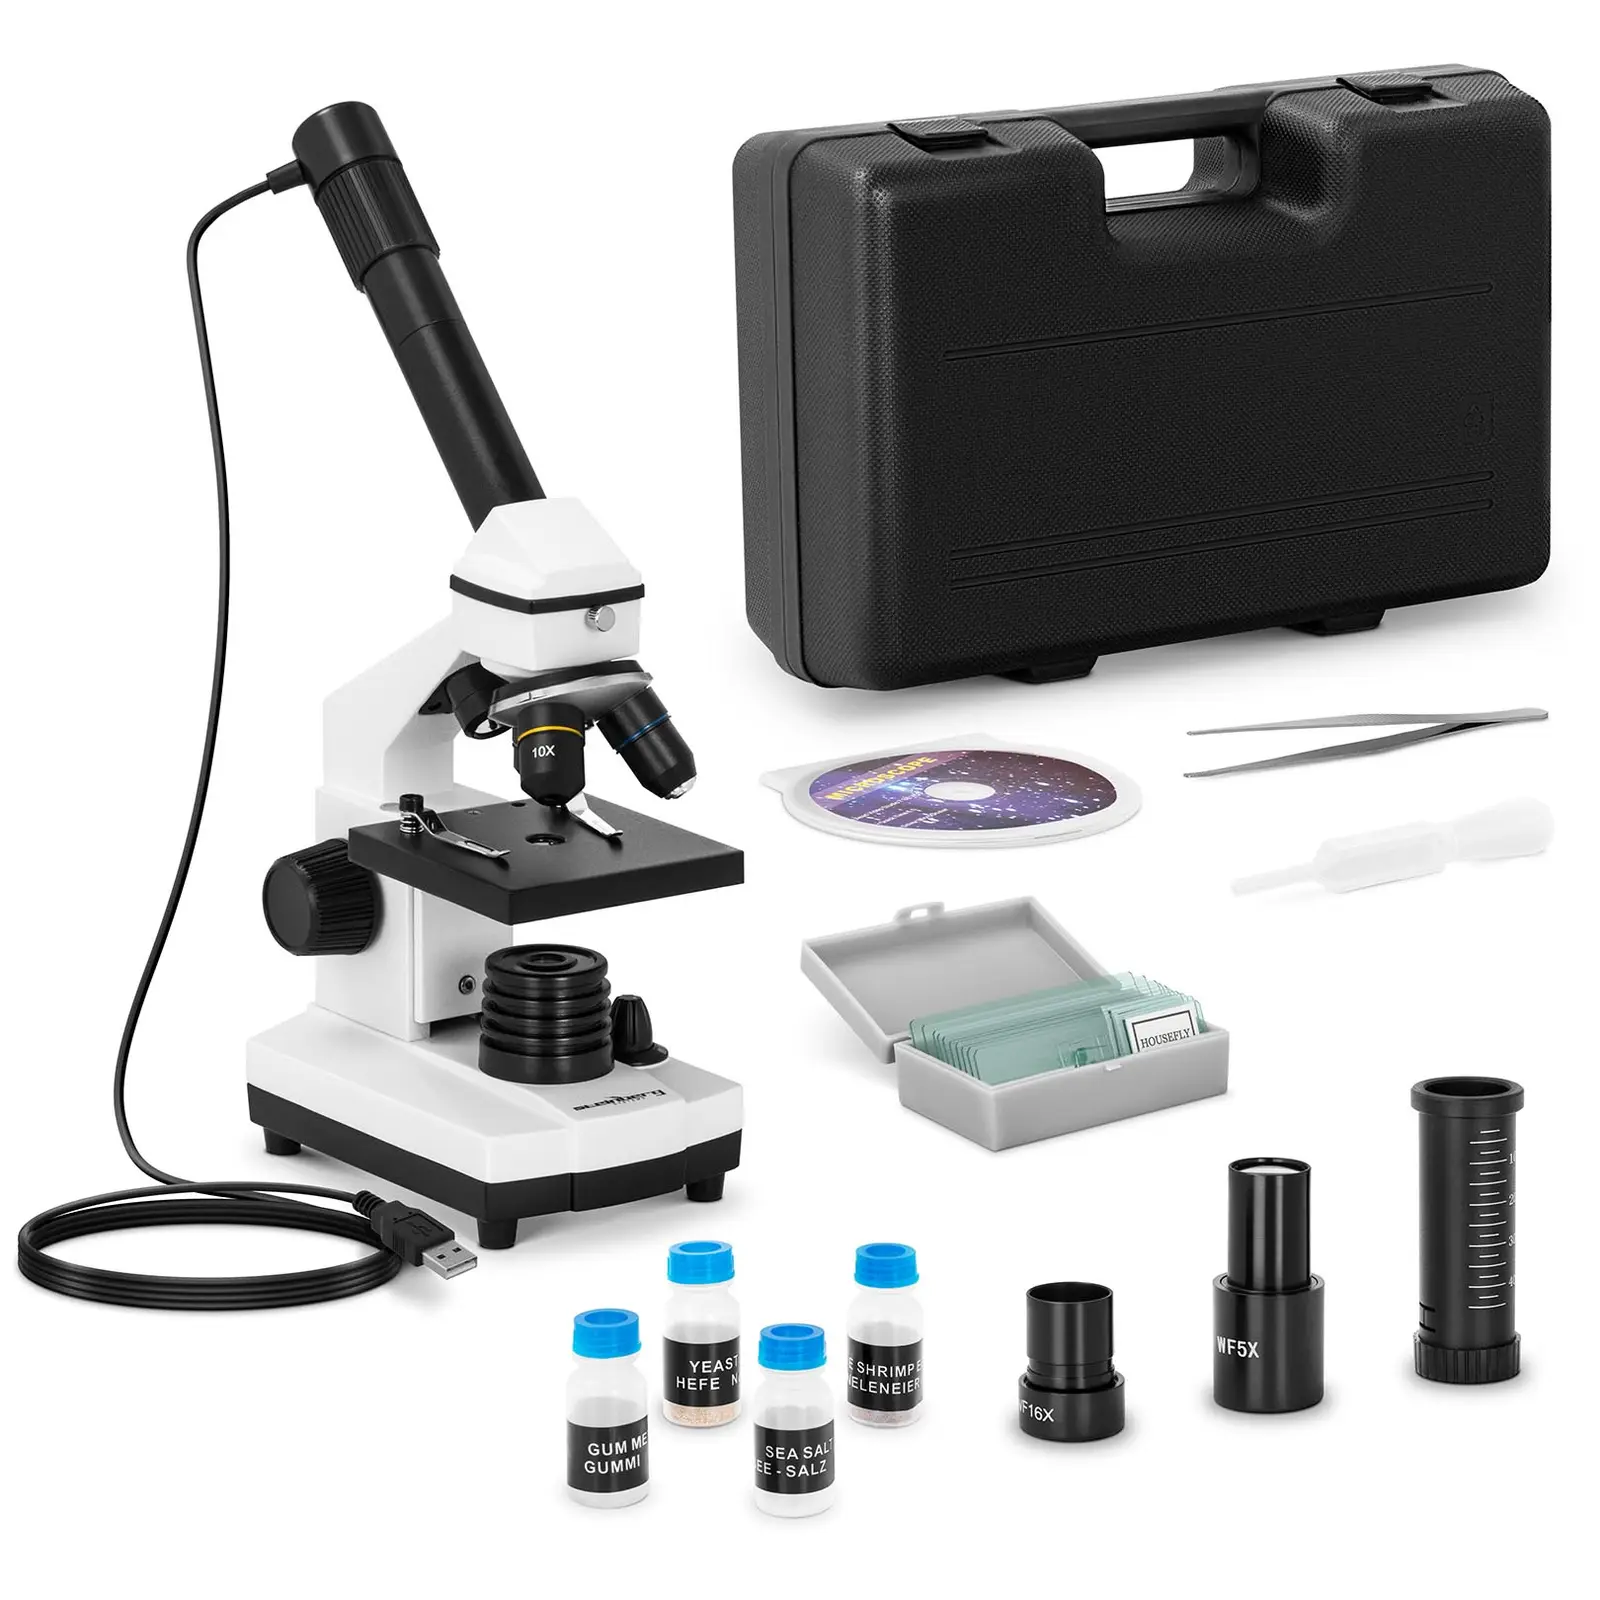 Microscope - 20- to 1,280x - camera 10 MP - LED - incl. accessories